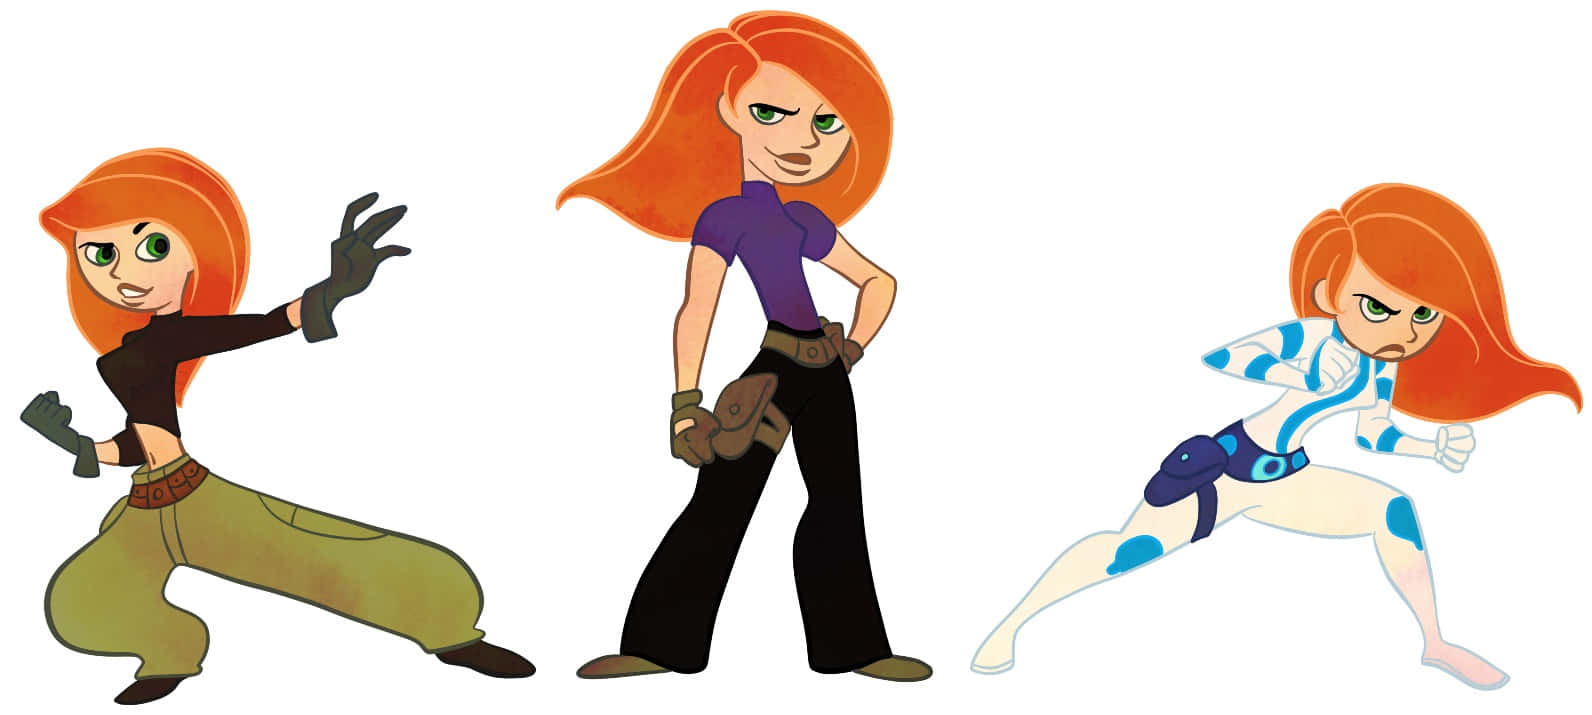 Kim Possible poses heroically in a wide wallpaper image showcasing the animated character in action. Wallpaper